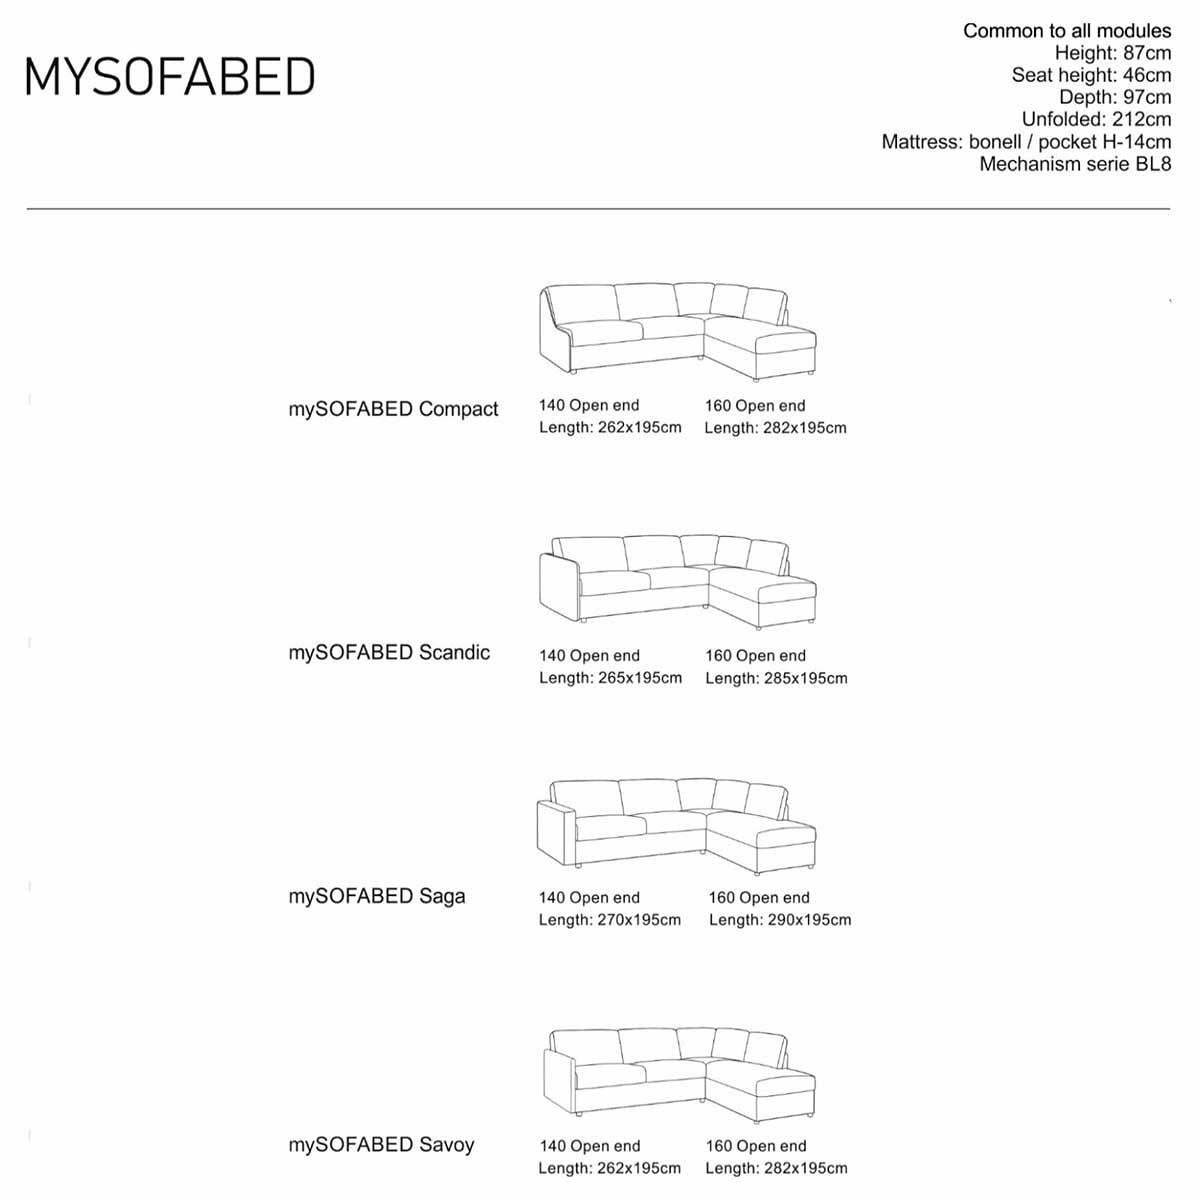 MySofabed Open-end